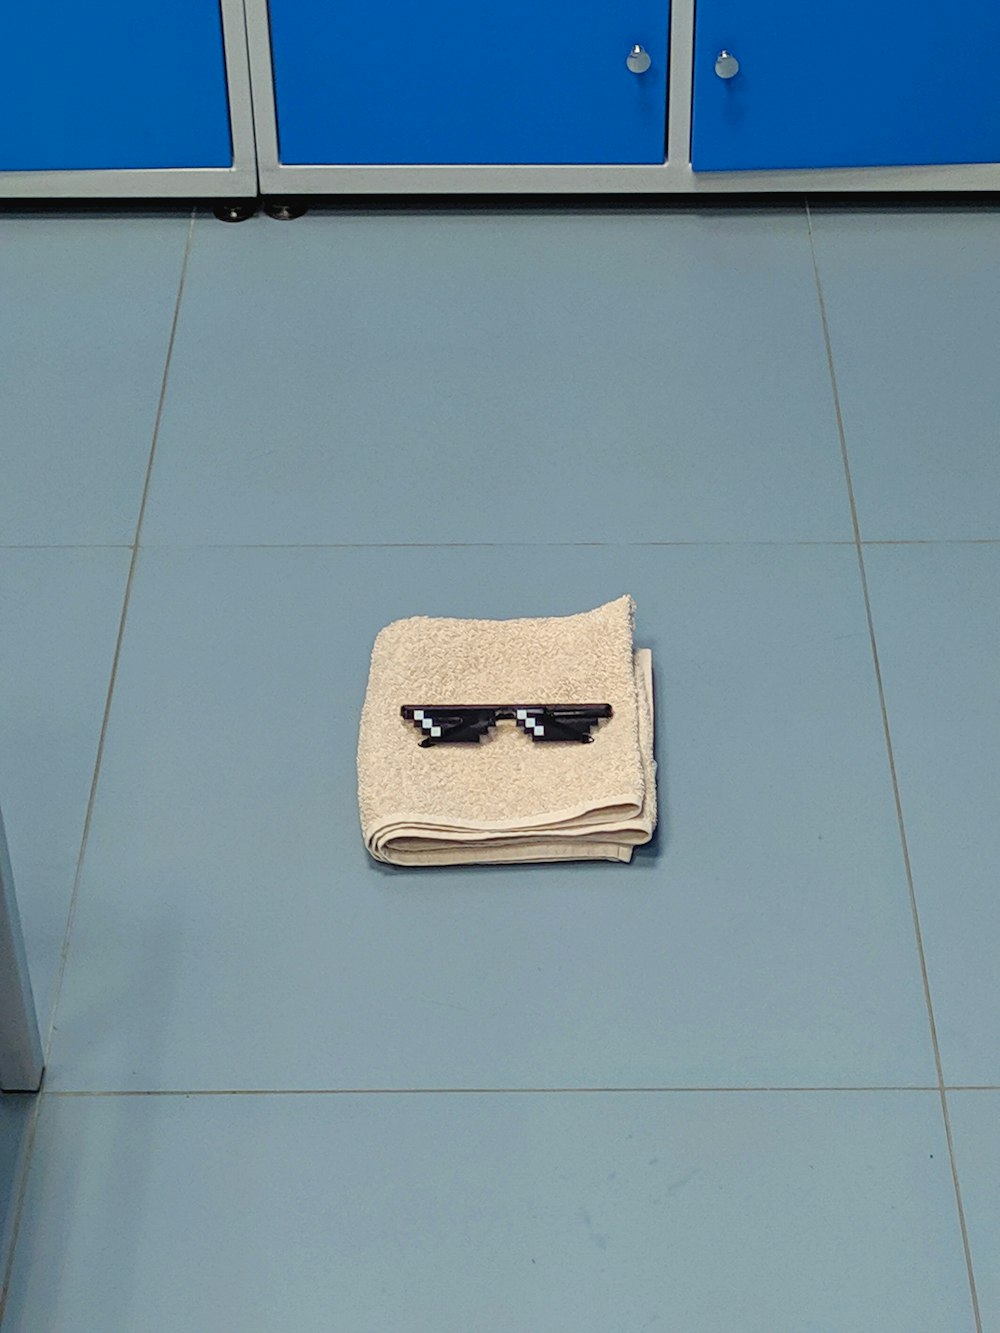 a pair of sunglasses laying on top of a towel